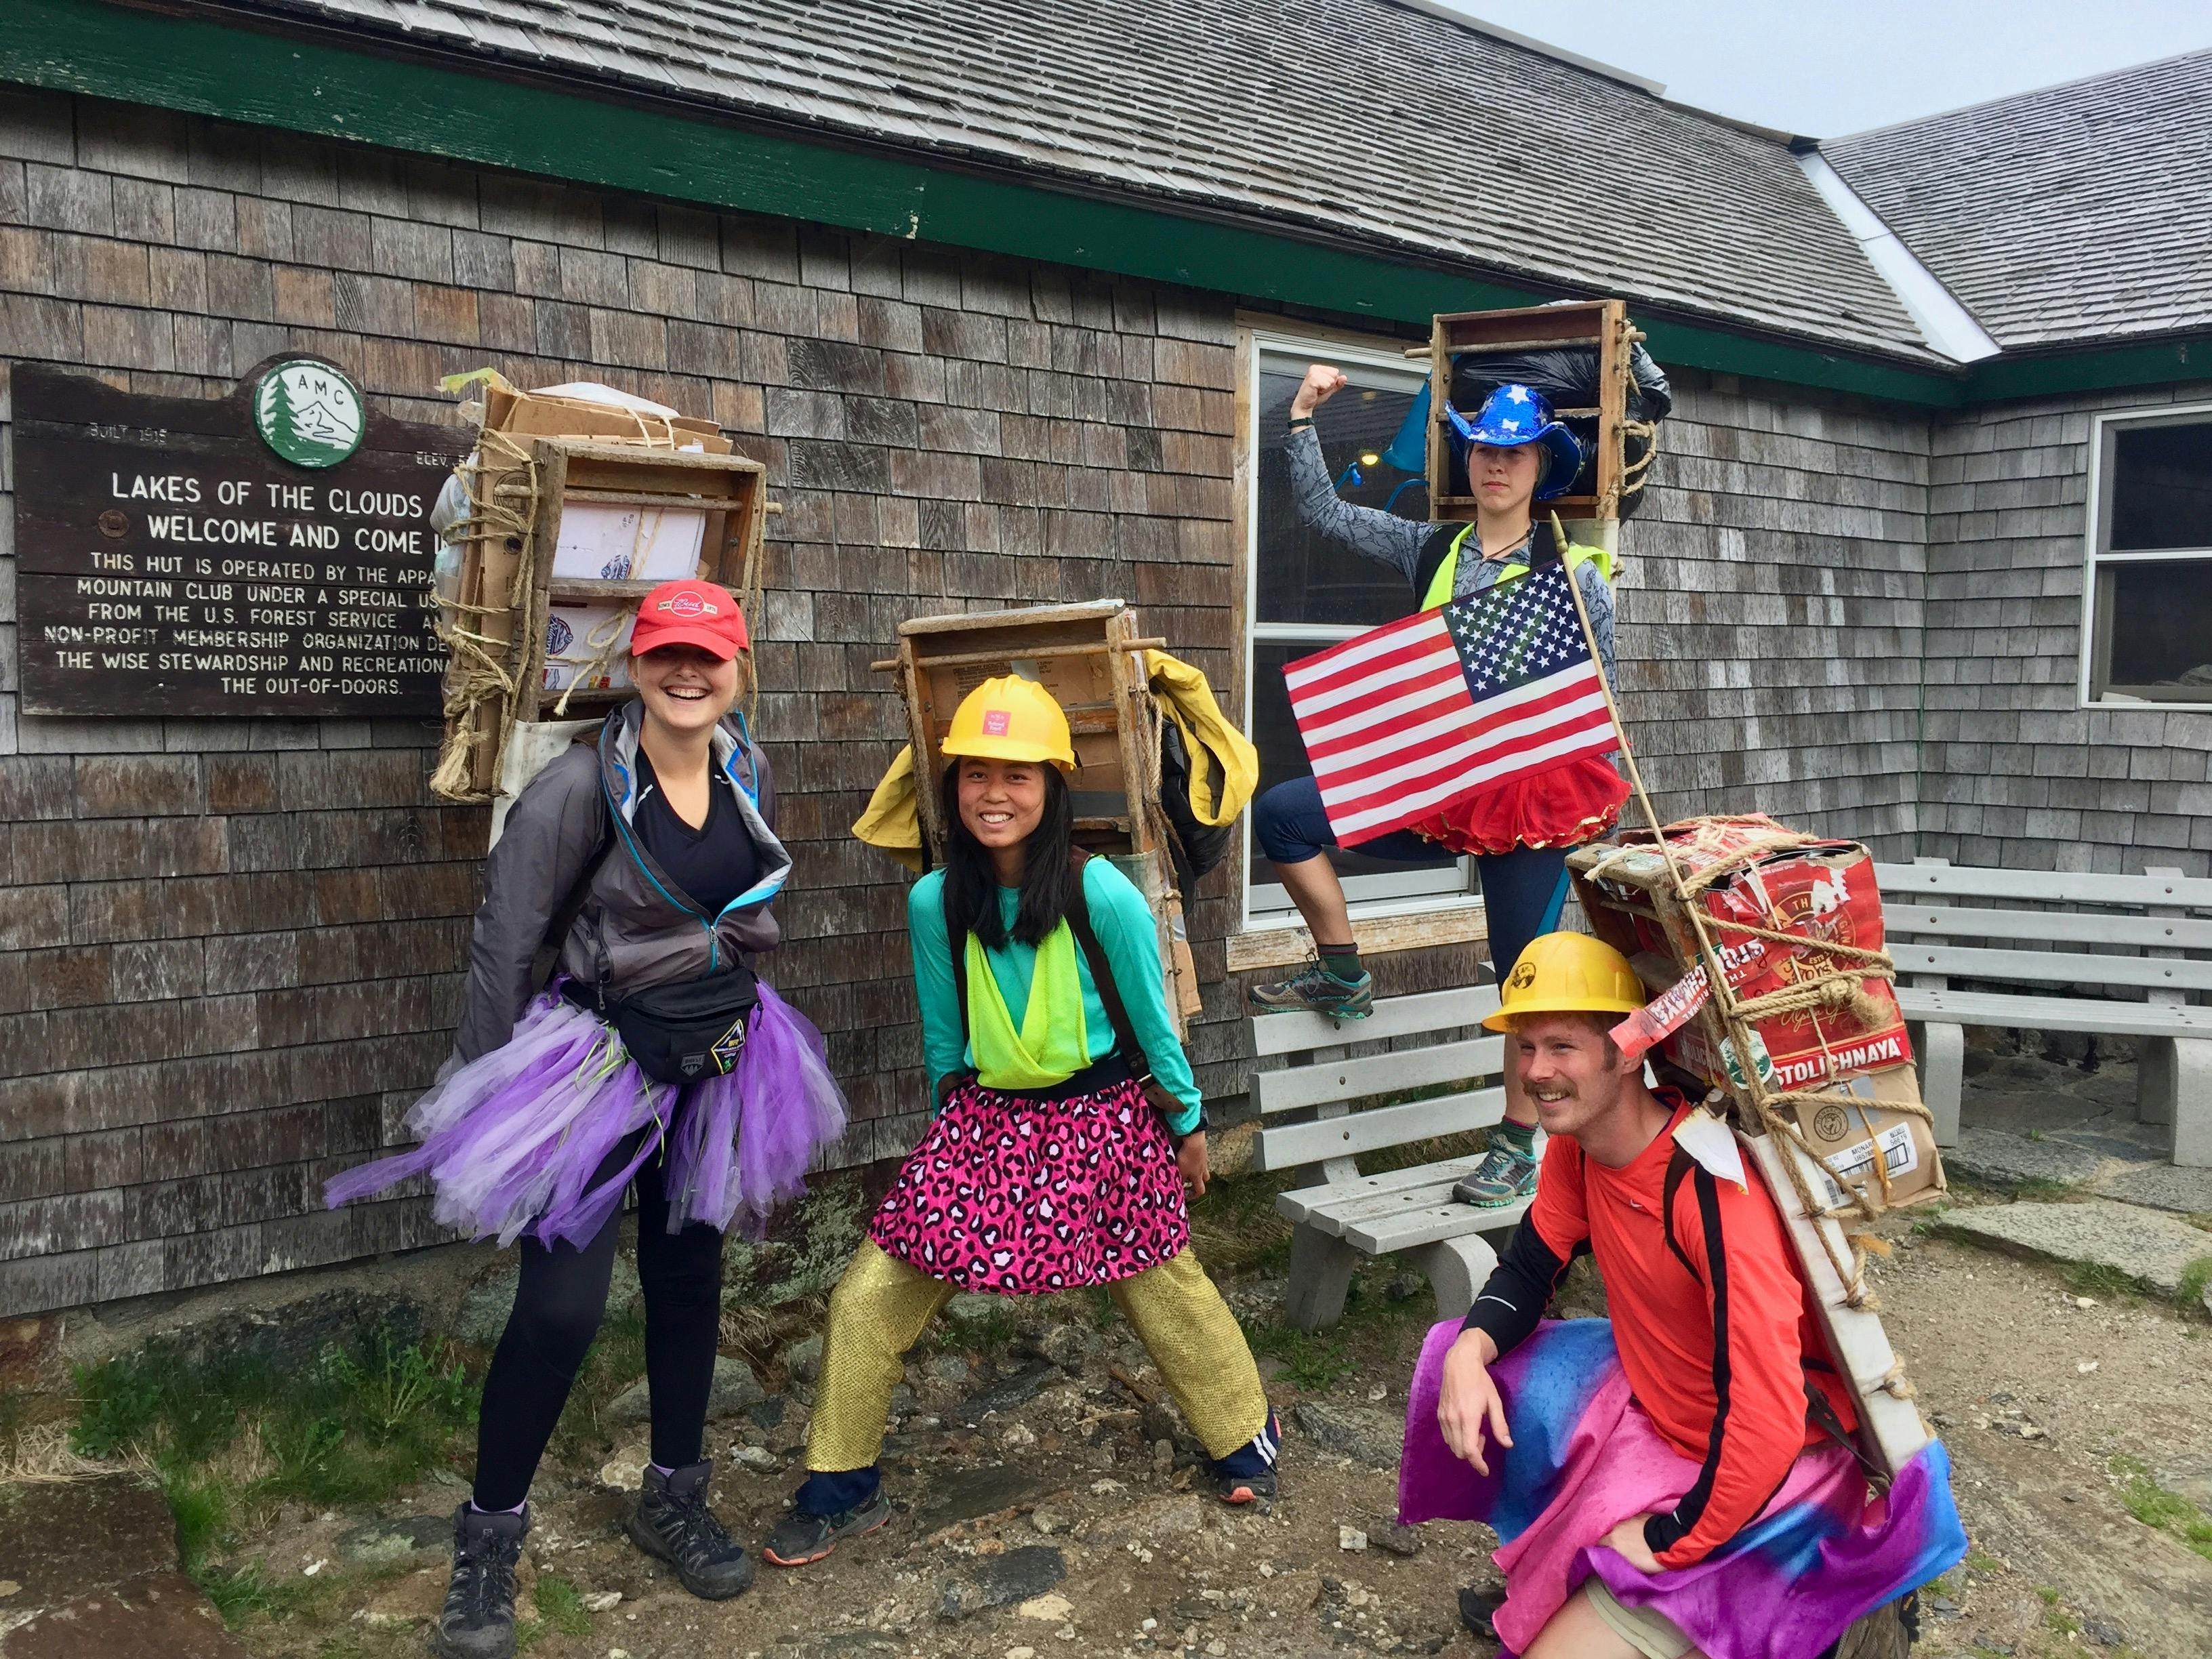 A group of people in silly skirts and costumes pose outside of a mountain hut.